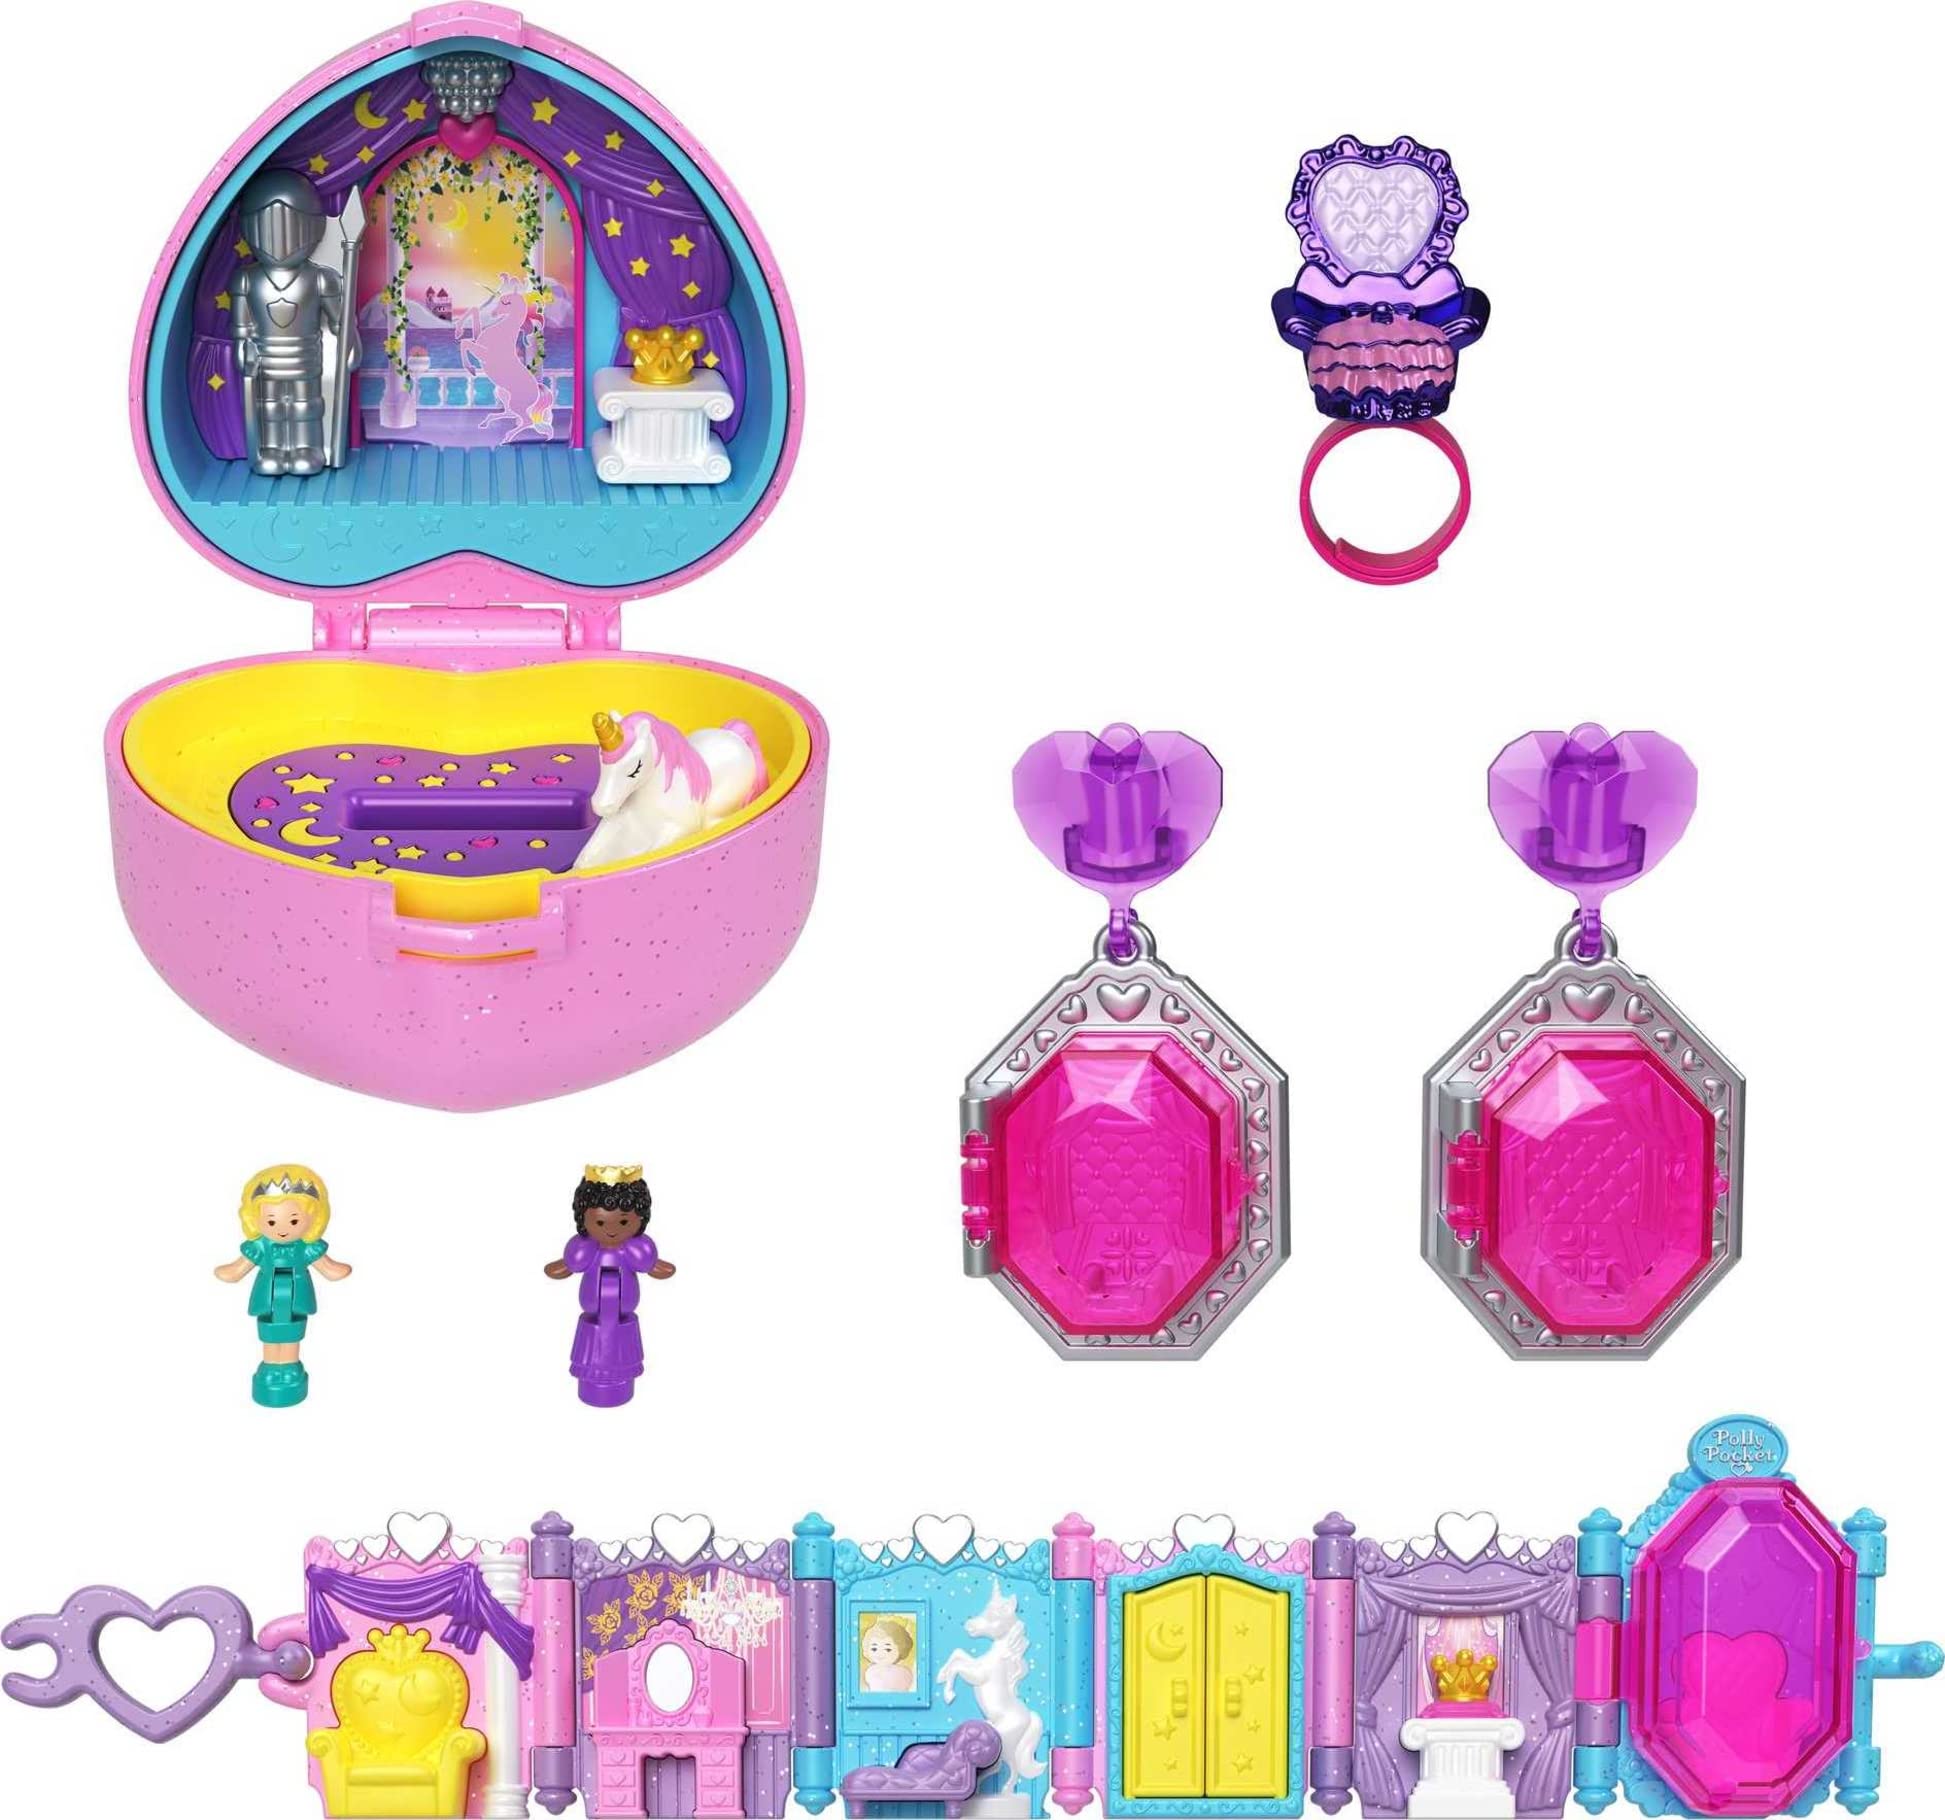 Polly Pocket Collector Compact w/ 2 Dolls and Keepsake Collection Royal Ball Jewelry Set (Unicorn Castle Theme) $7.07 + Free Shipping w/ Prime or on $25+